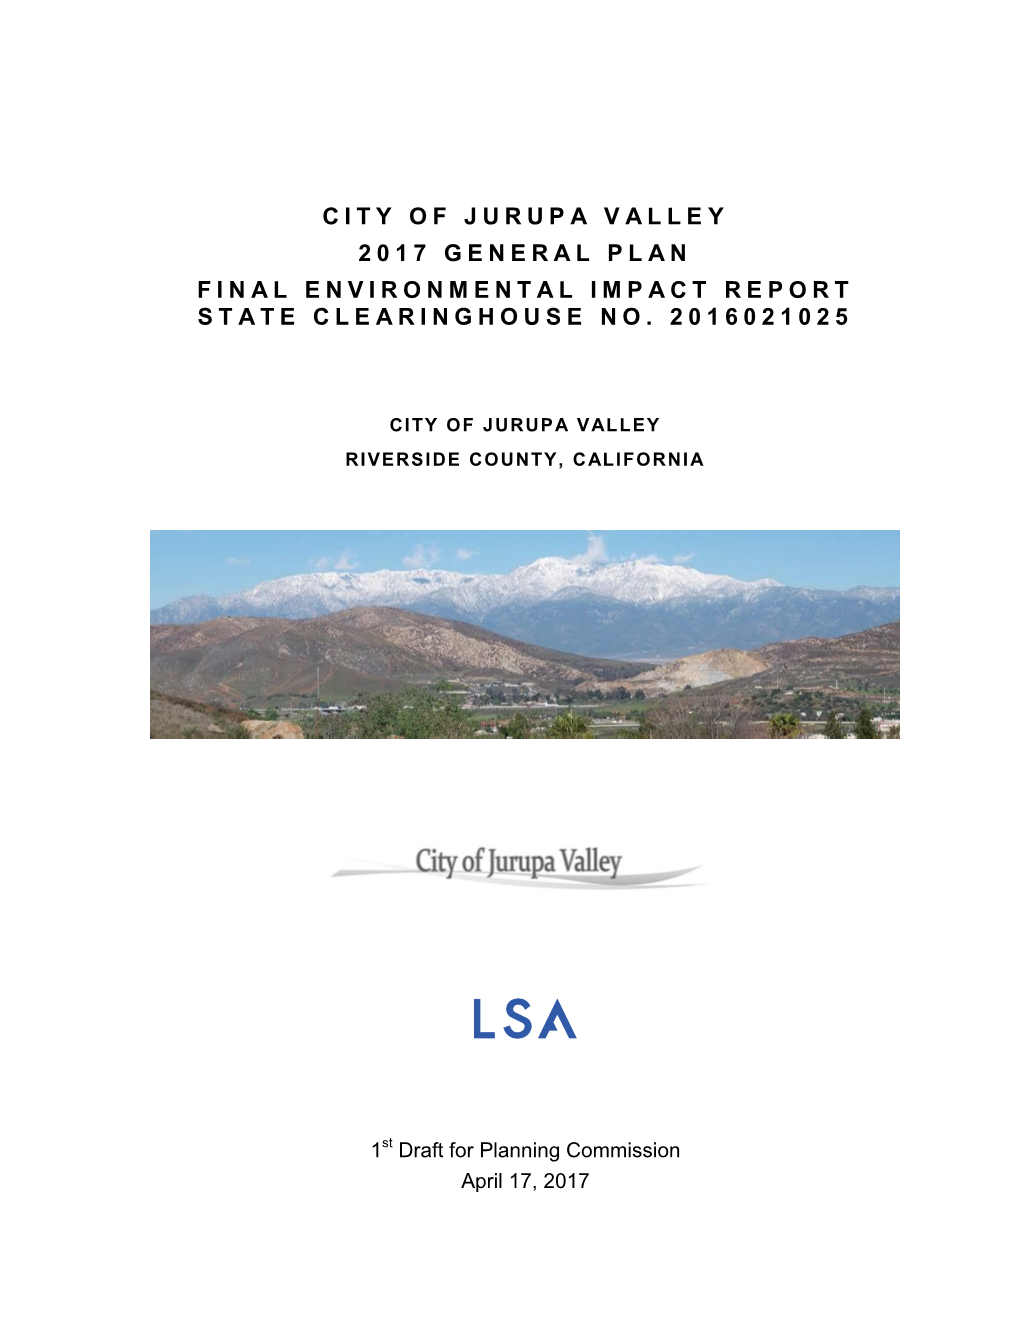 City of Jurupa Valley 2017 General Plan Final Environmental Impact Report State Clearinghouse No. 2016021025